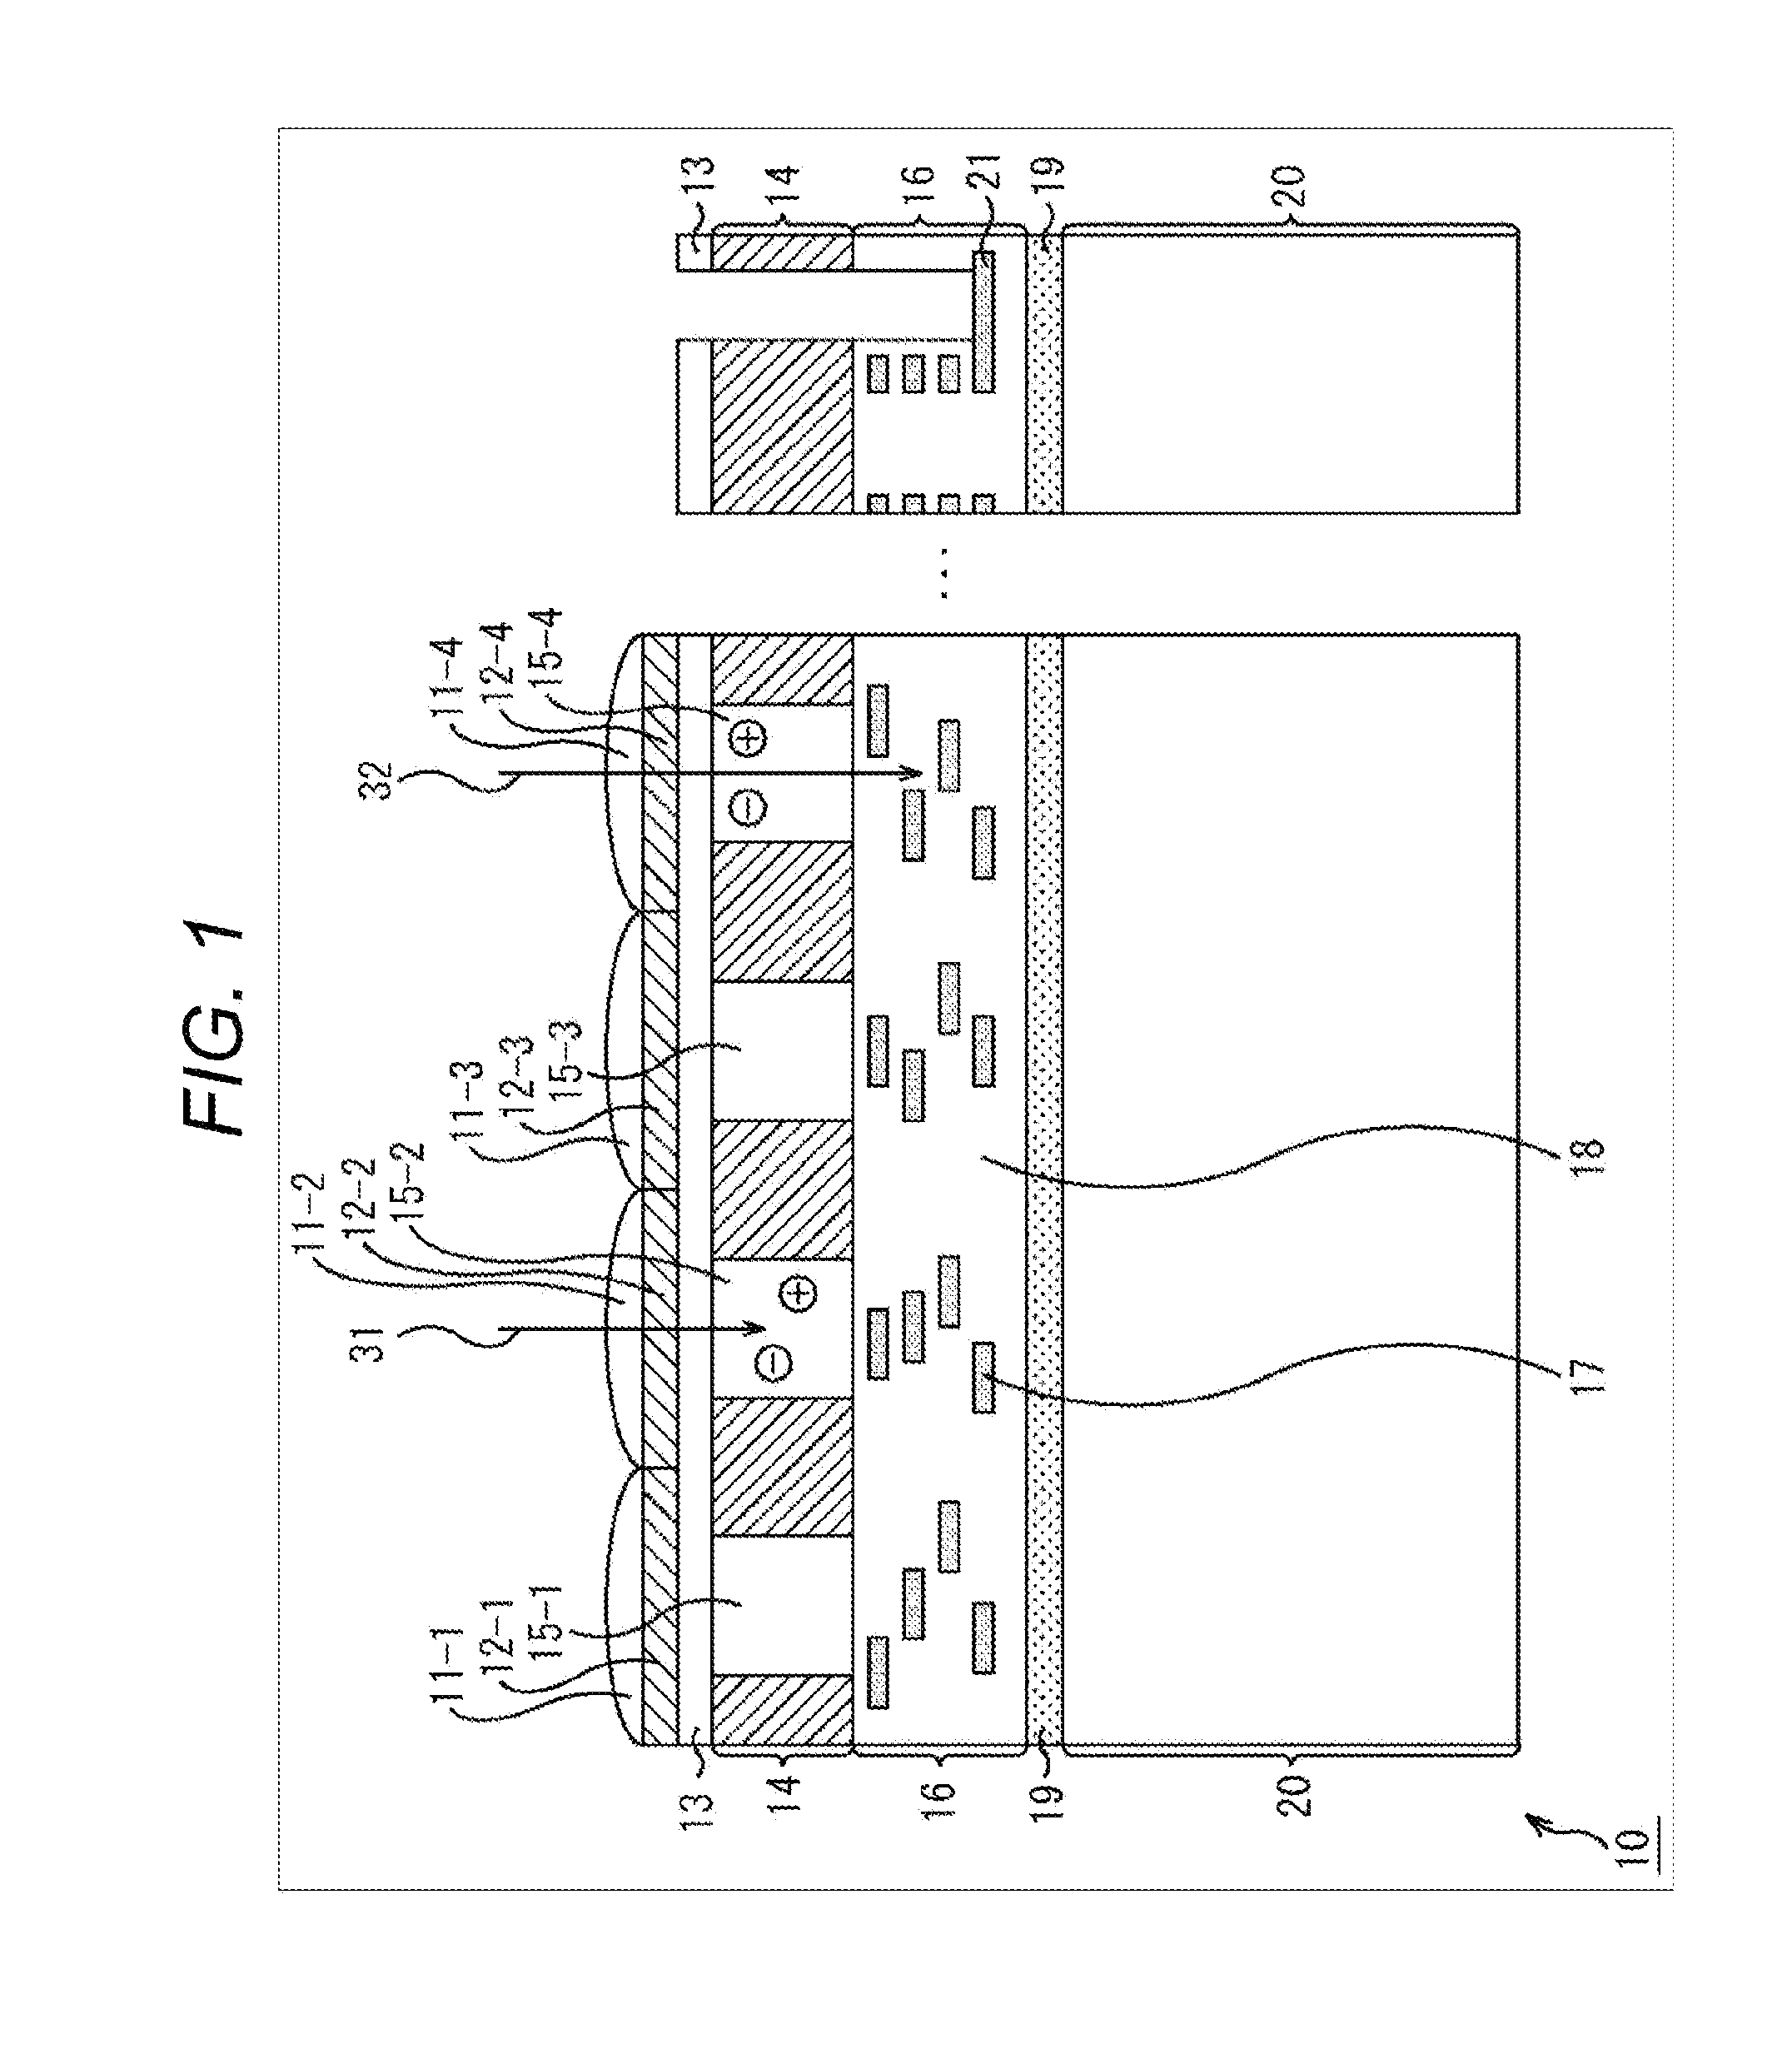 Imaging element, electronic device, and information processing device